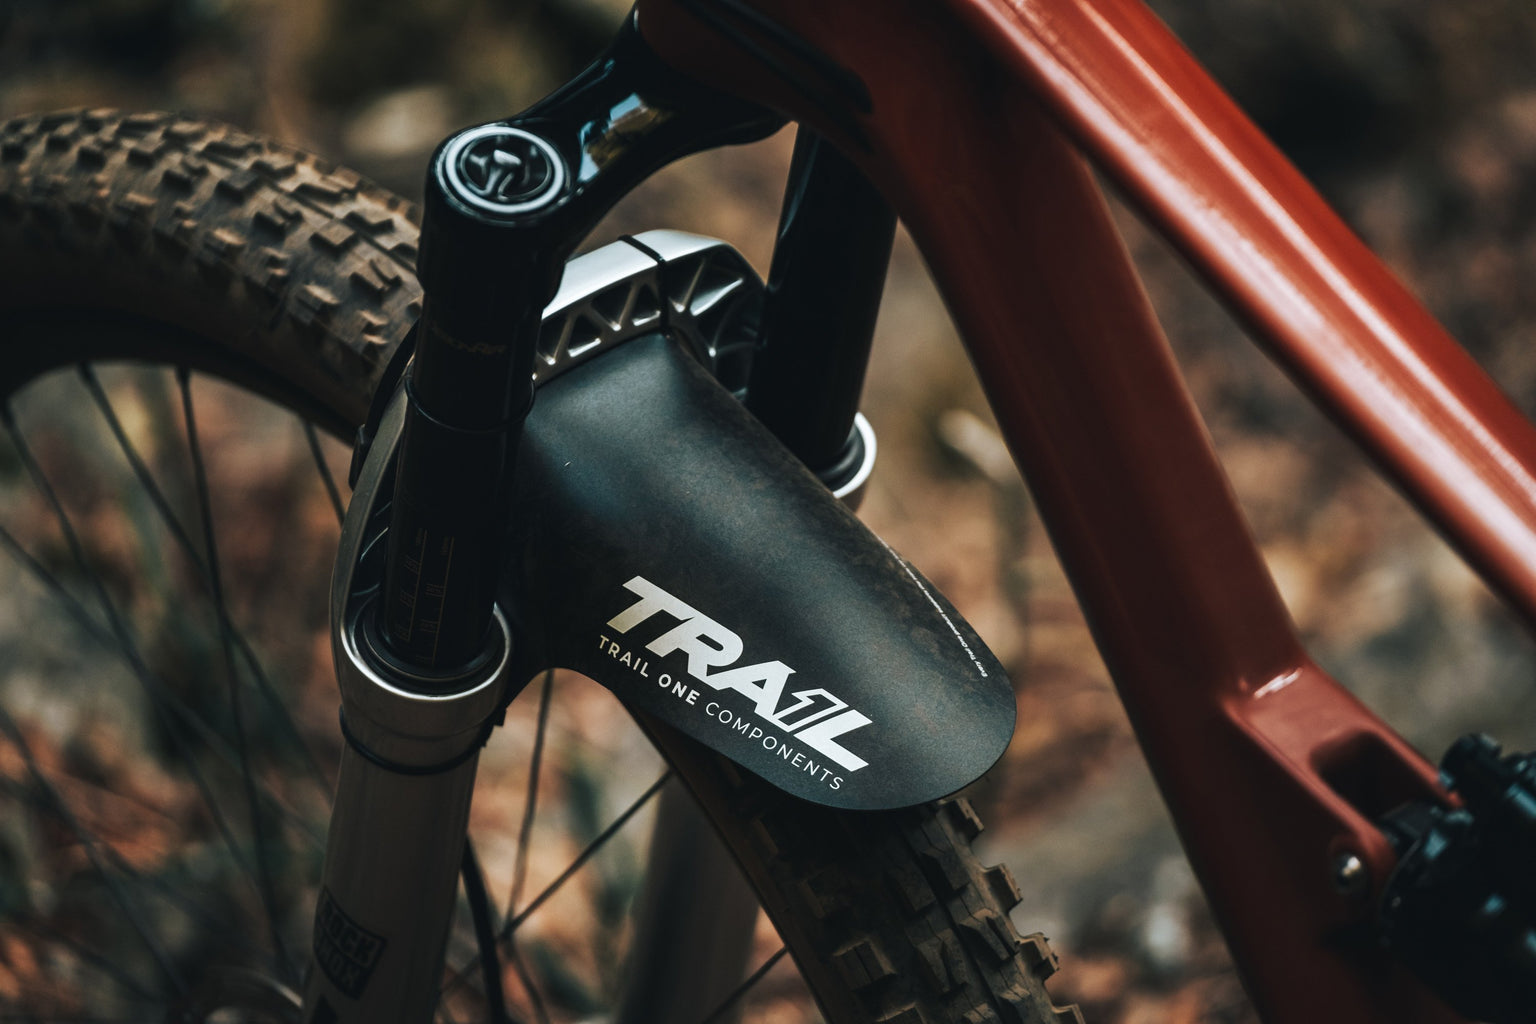 Trail One Components Fender MPN: 2015-2 Clip-On Fender T1 Fender